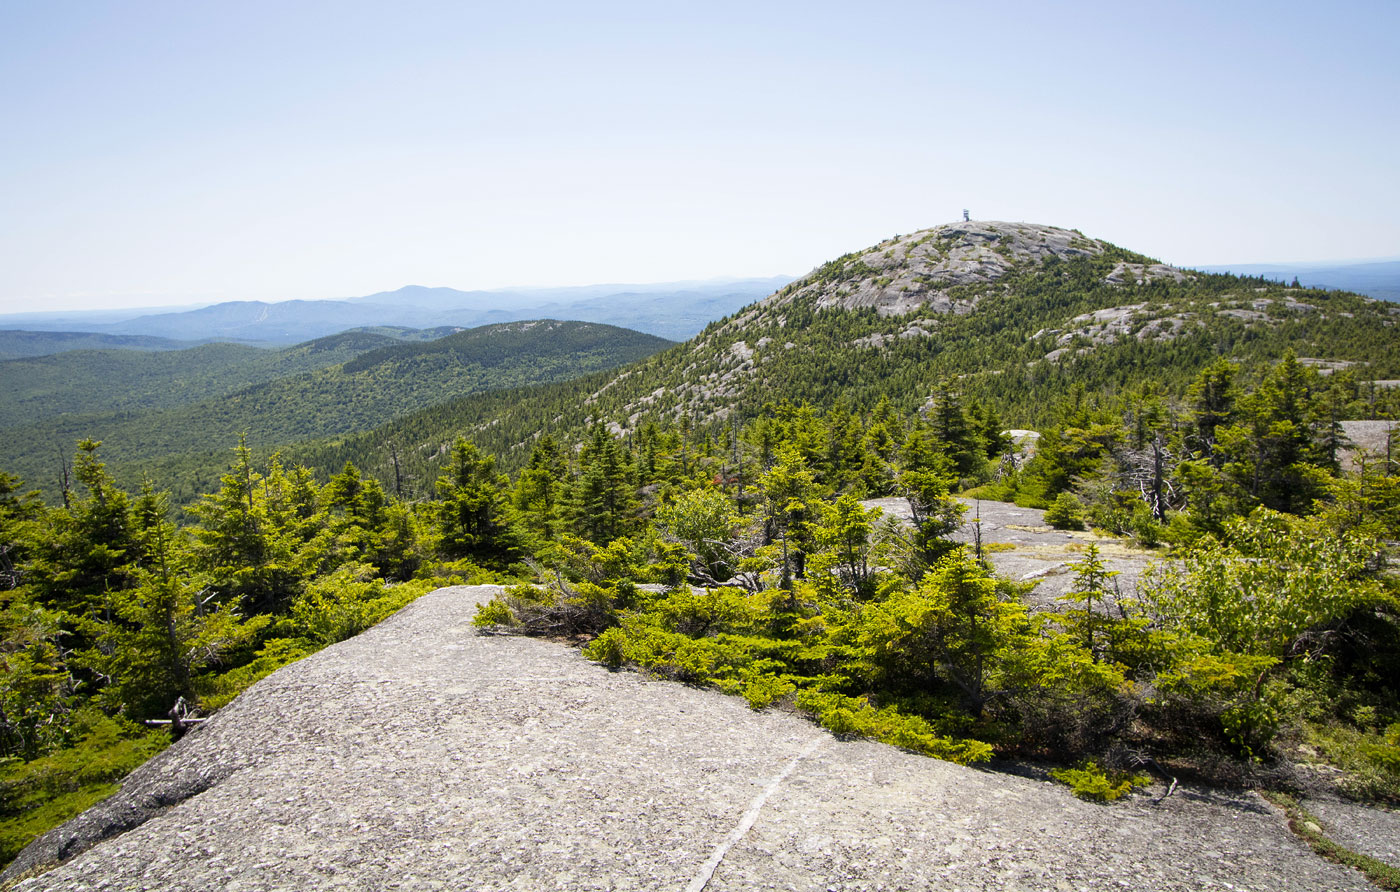 Hike Mount Cardigan via Holt Trail in Cardigan Mountain State Park, New Hampshire - Stav is Lost